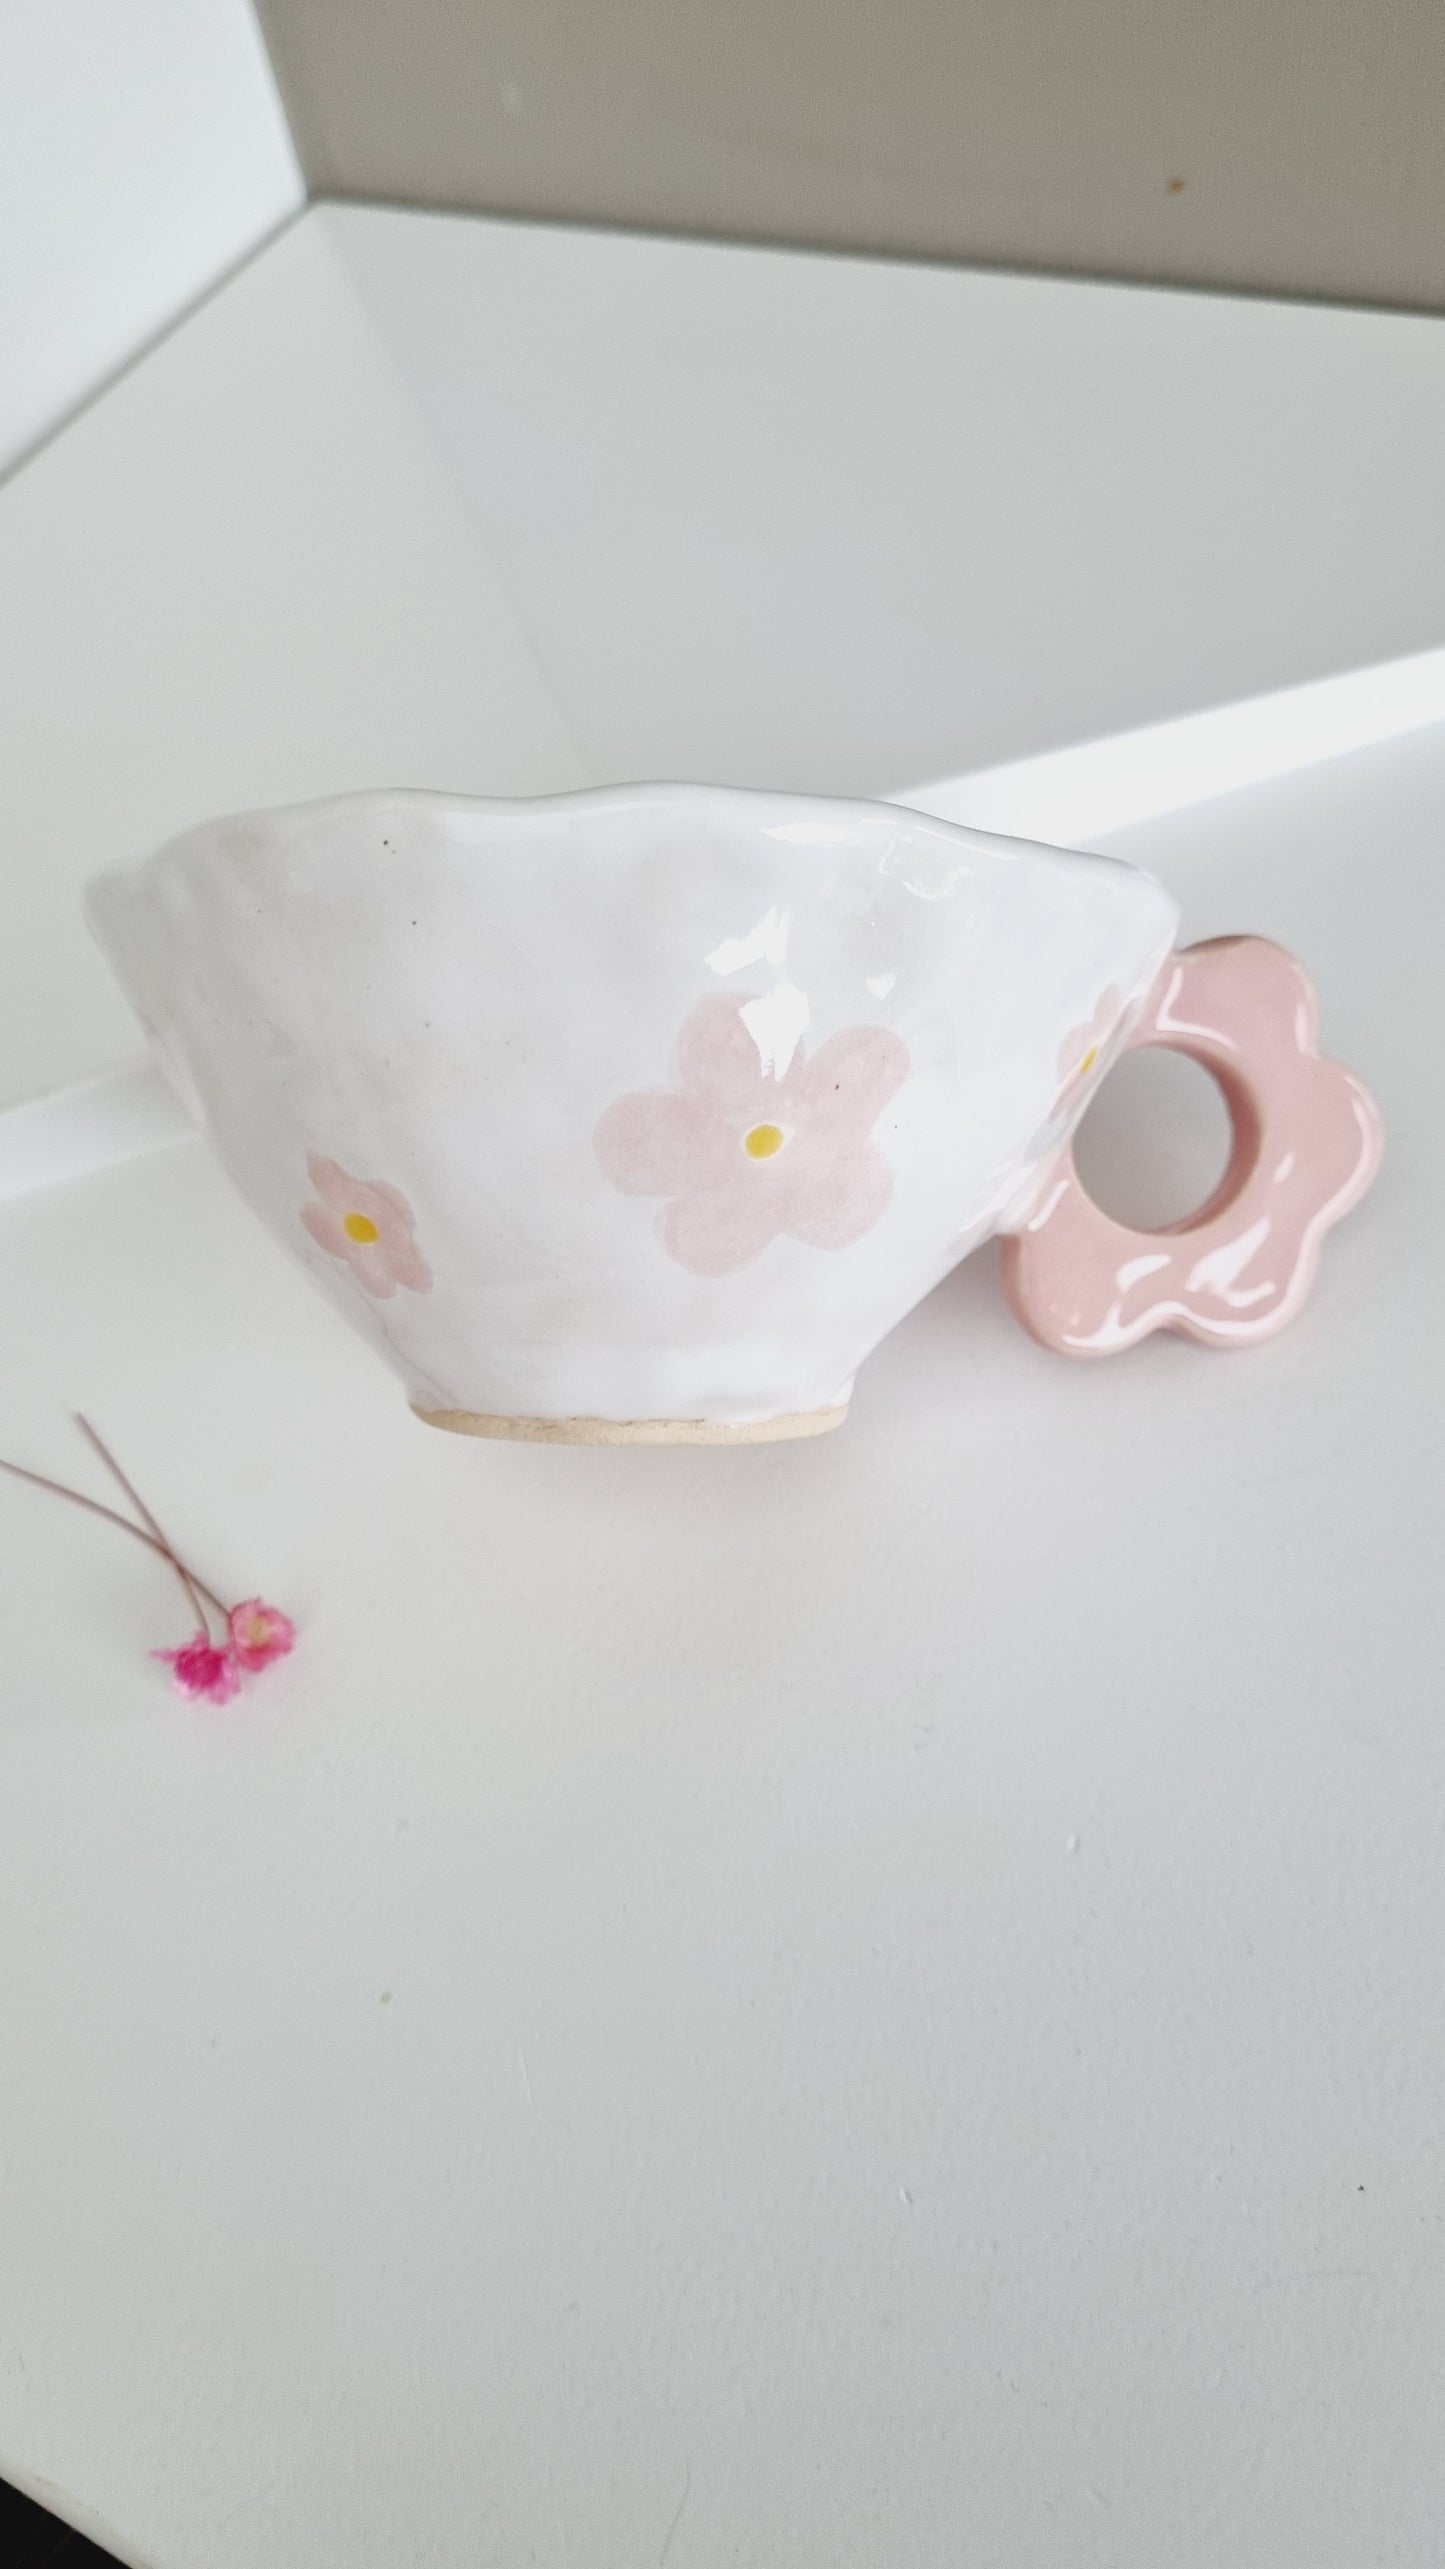 Girly Pink Ceramic Cup, Whimsical Handmade and Handpainted mug with Daisies, Flower Shape Handle